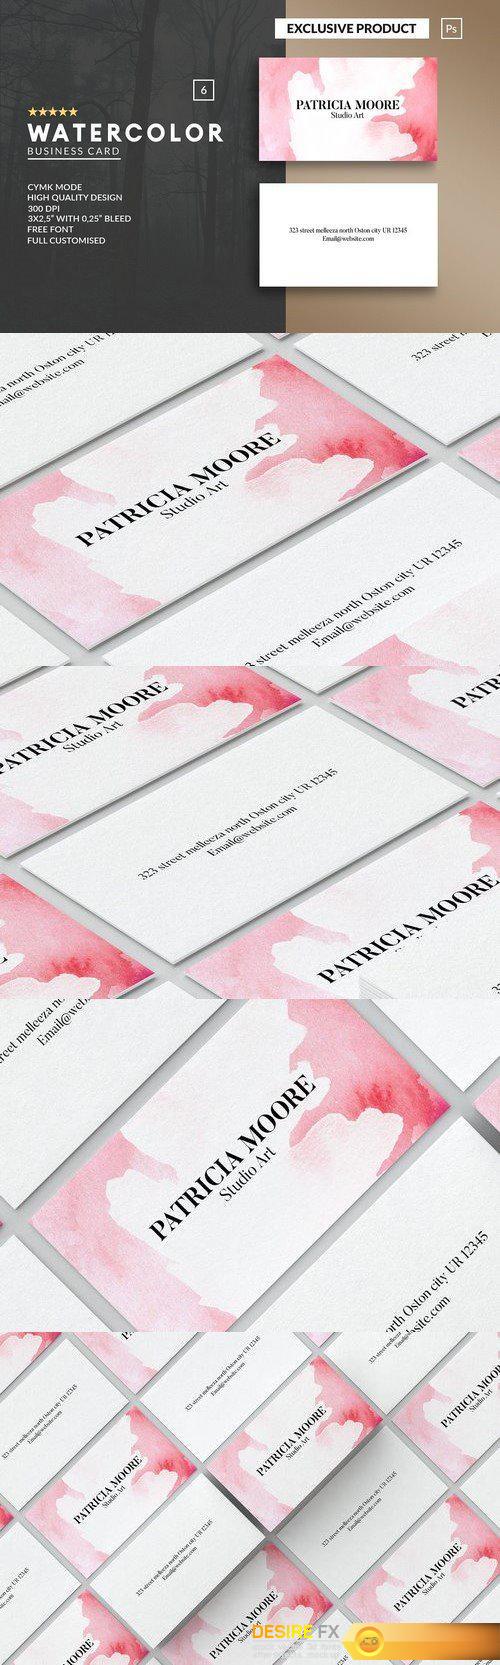 CM - Watercolor Business Card Template 1367488